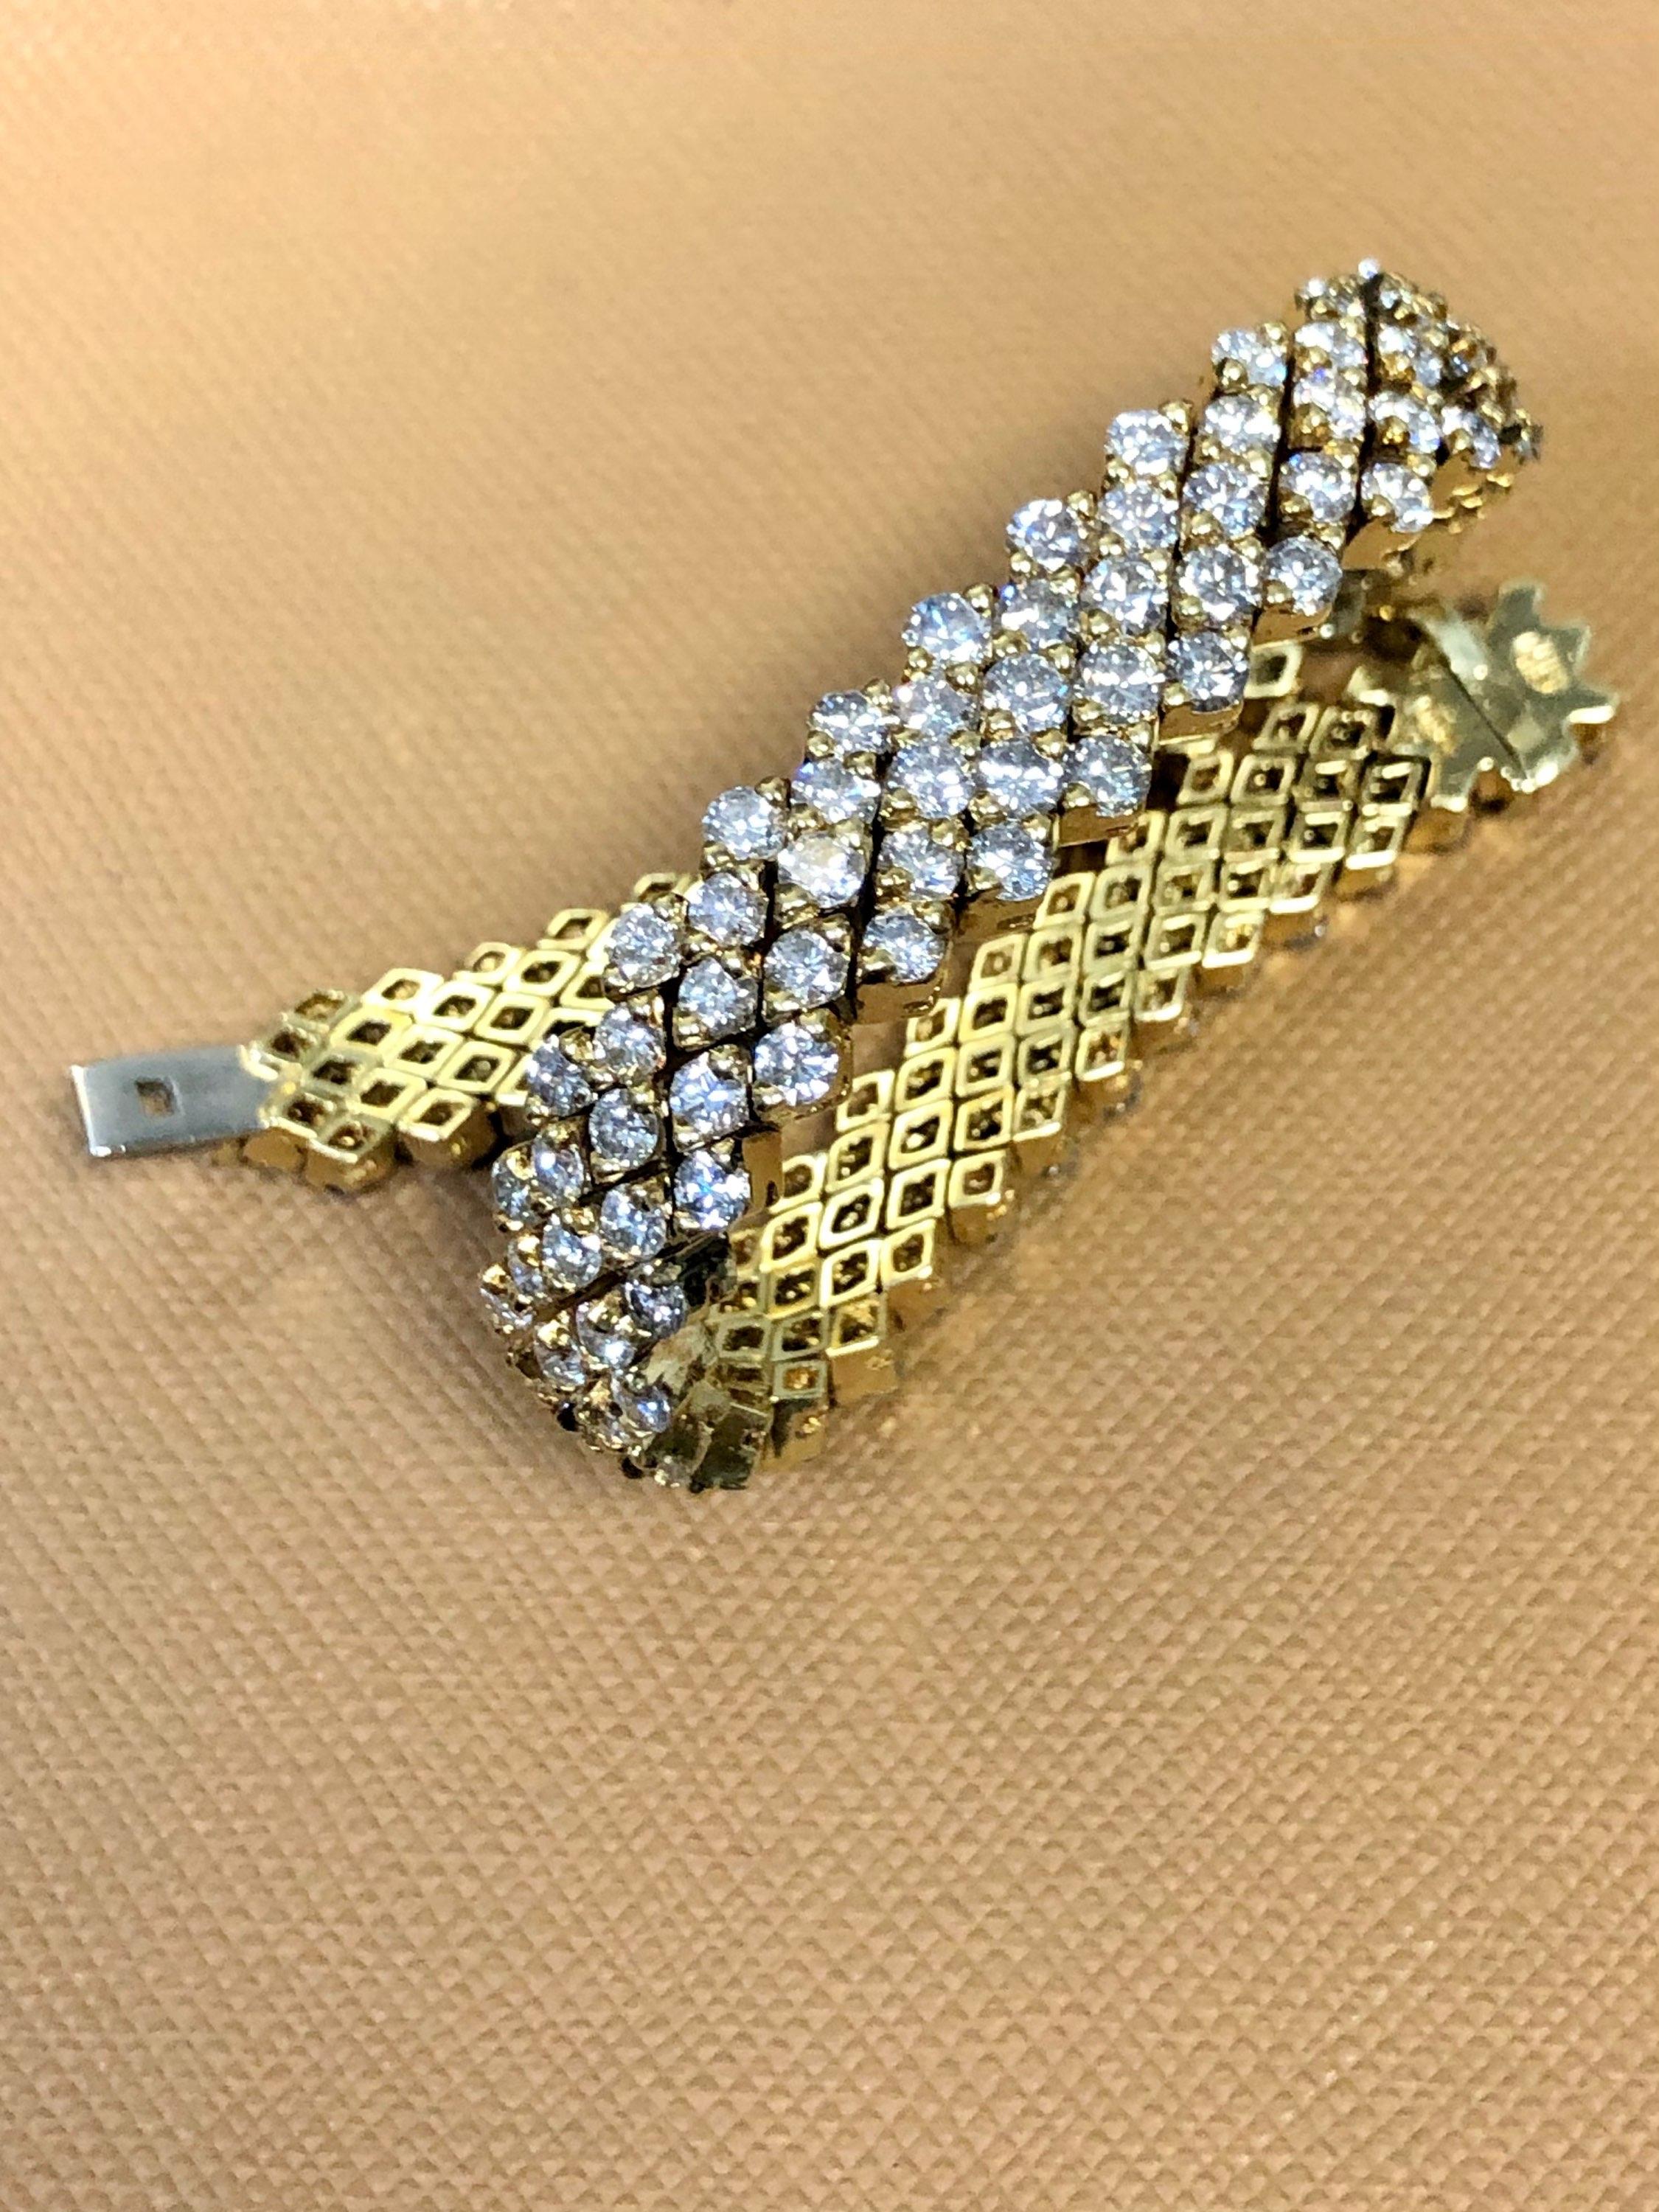 When you have been in the jewelry industry long enough, you wind up owning variations of the same item. This bracelet is the smaller version of another that we own and they are more than likely the same manufacturer. This bracelet is done in 18K